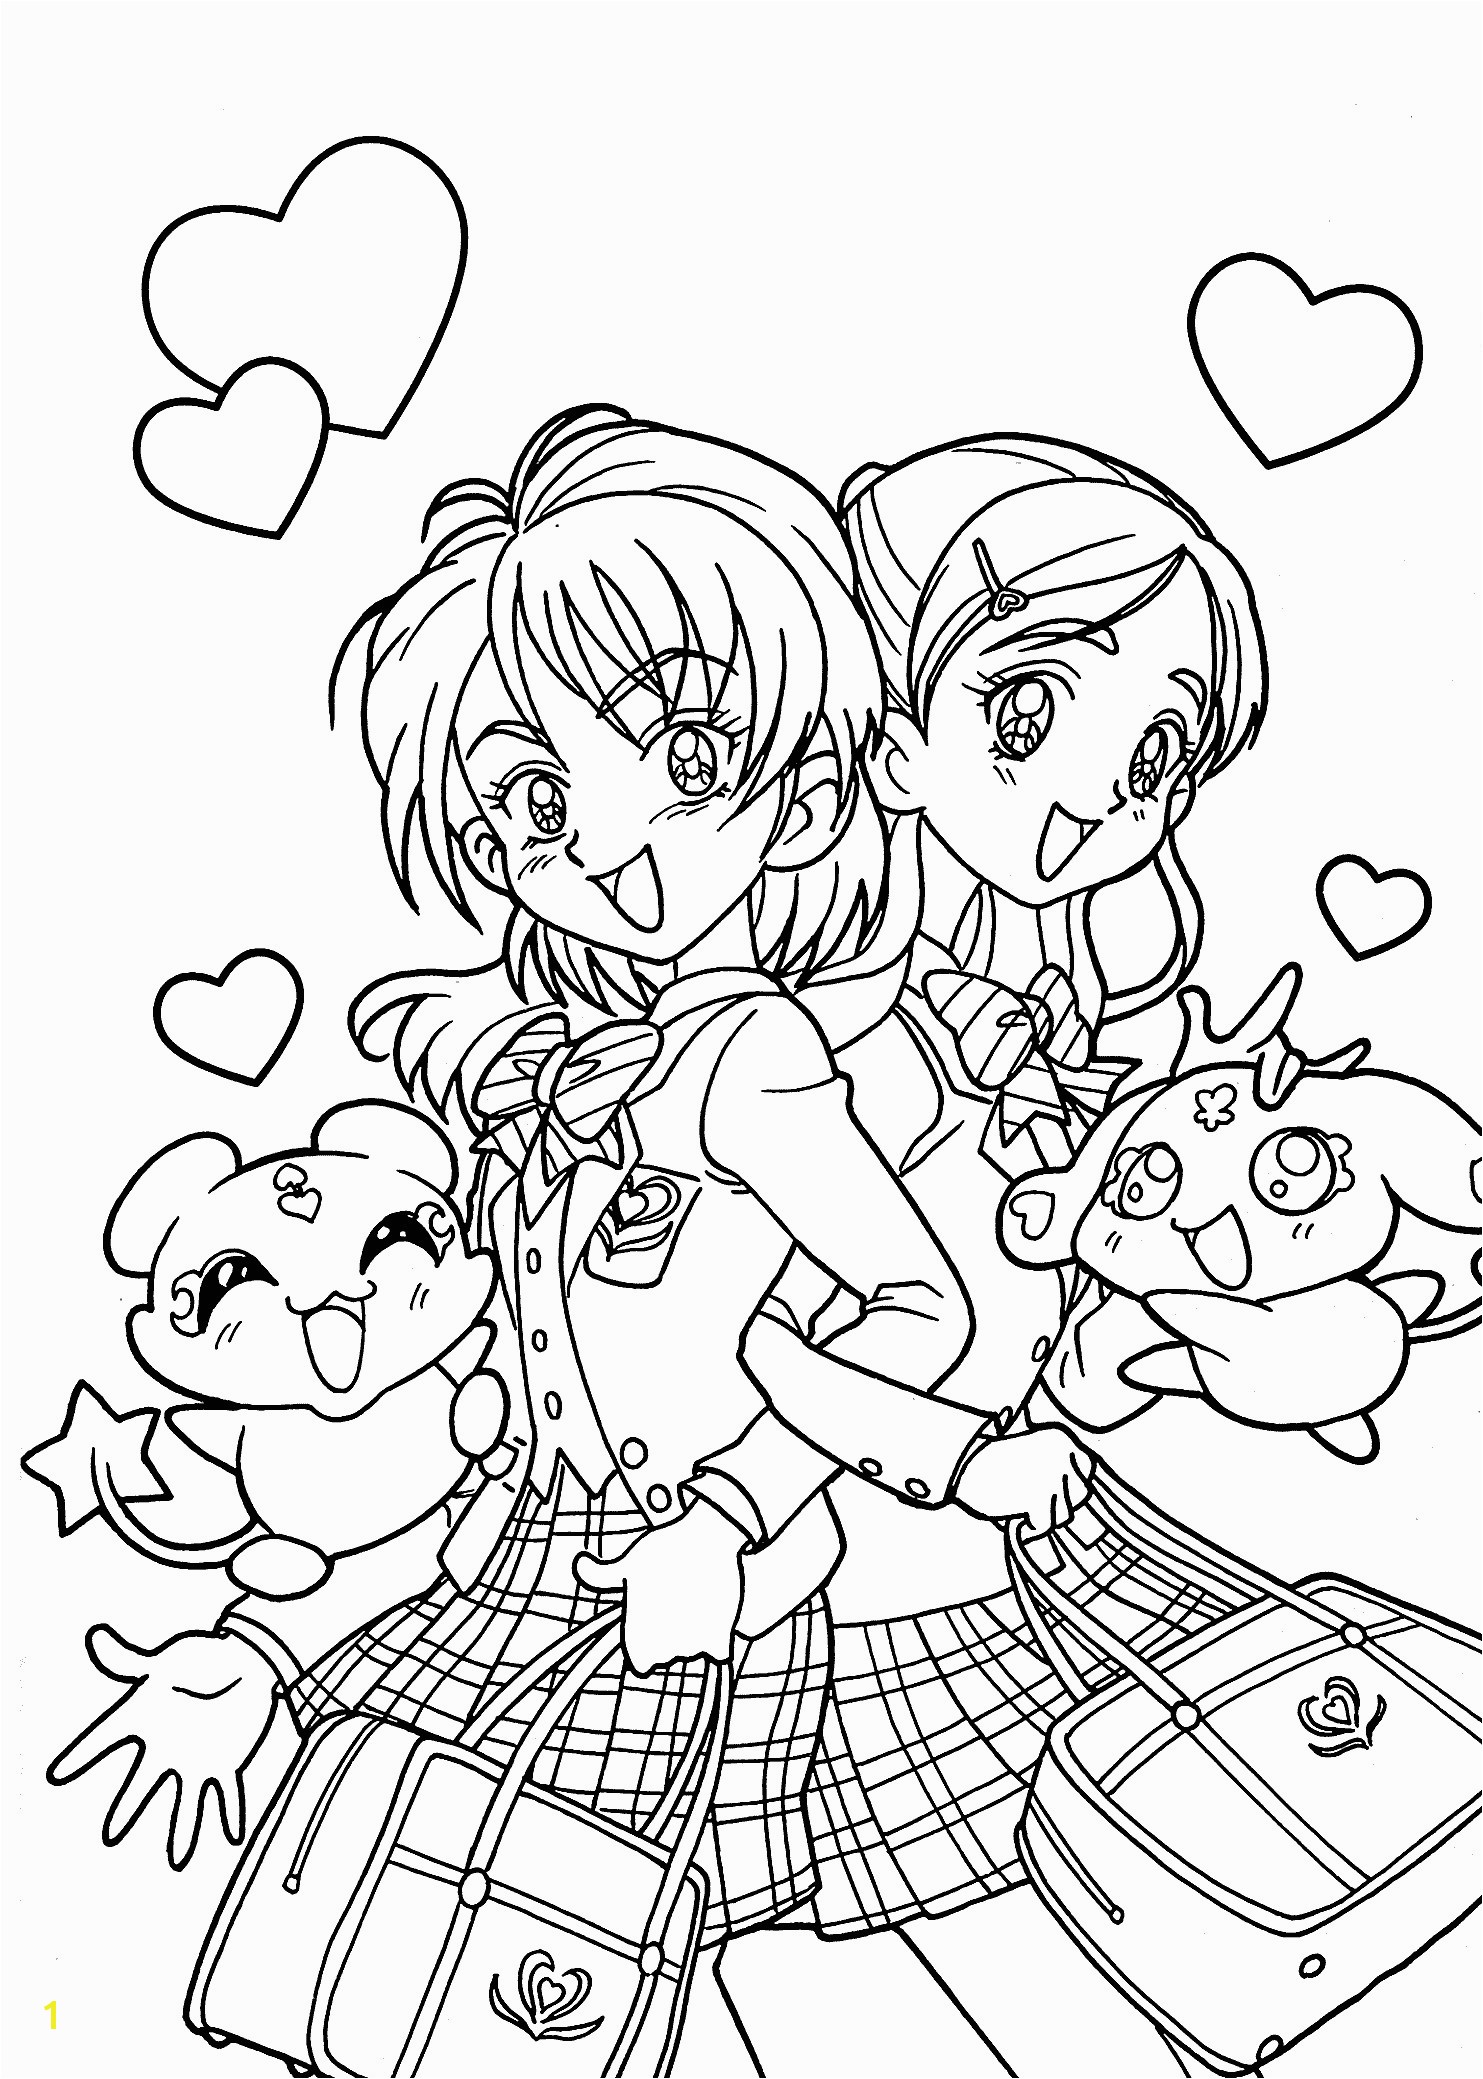 Cute Anime Coloring Pages Cute Anime Chibi Girl Coloring Pages Beautiful Printable Coloring